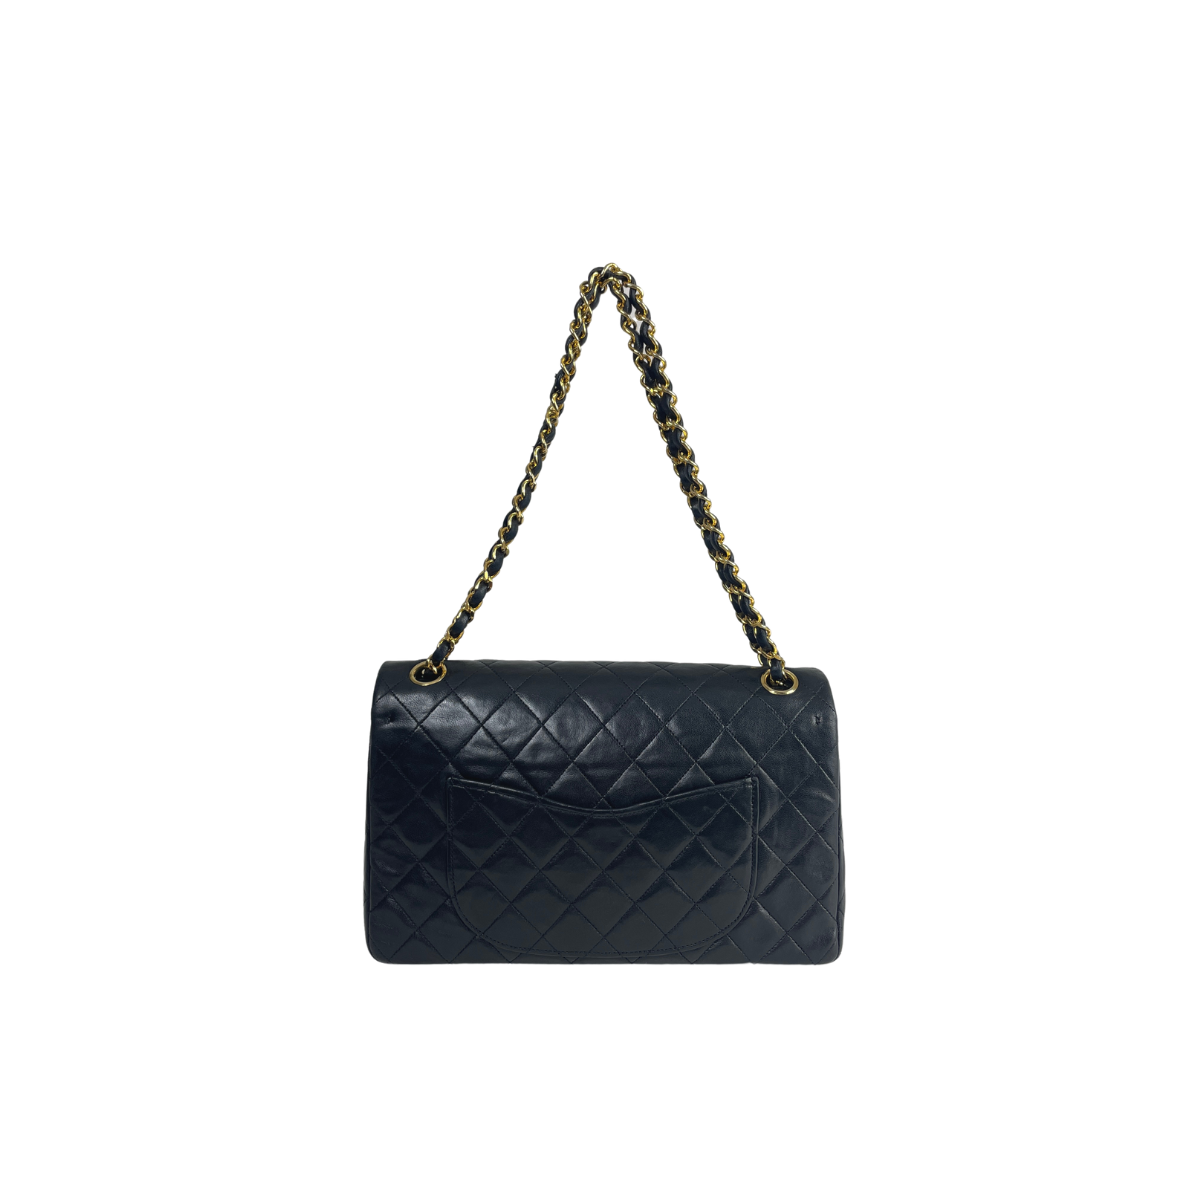 Chanel 4-series Black Medium Classic Flap in Lambskin with 24K Gold Hardware